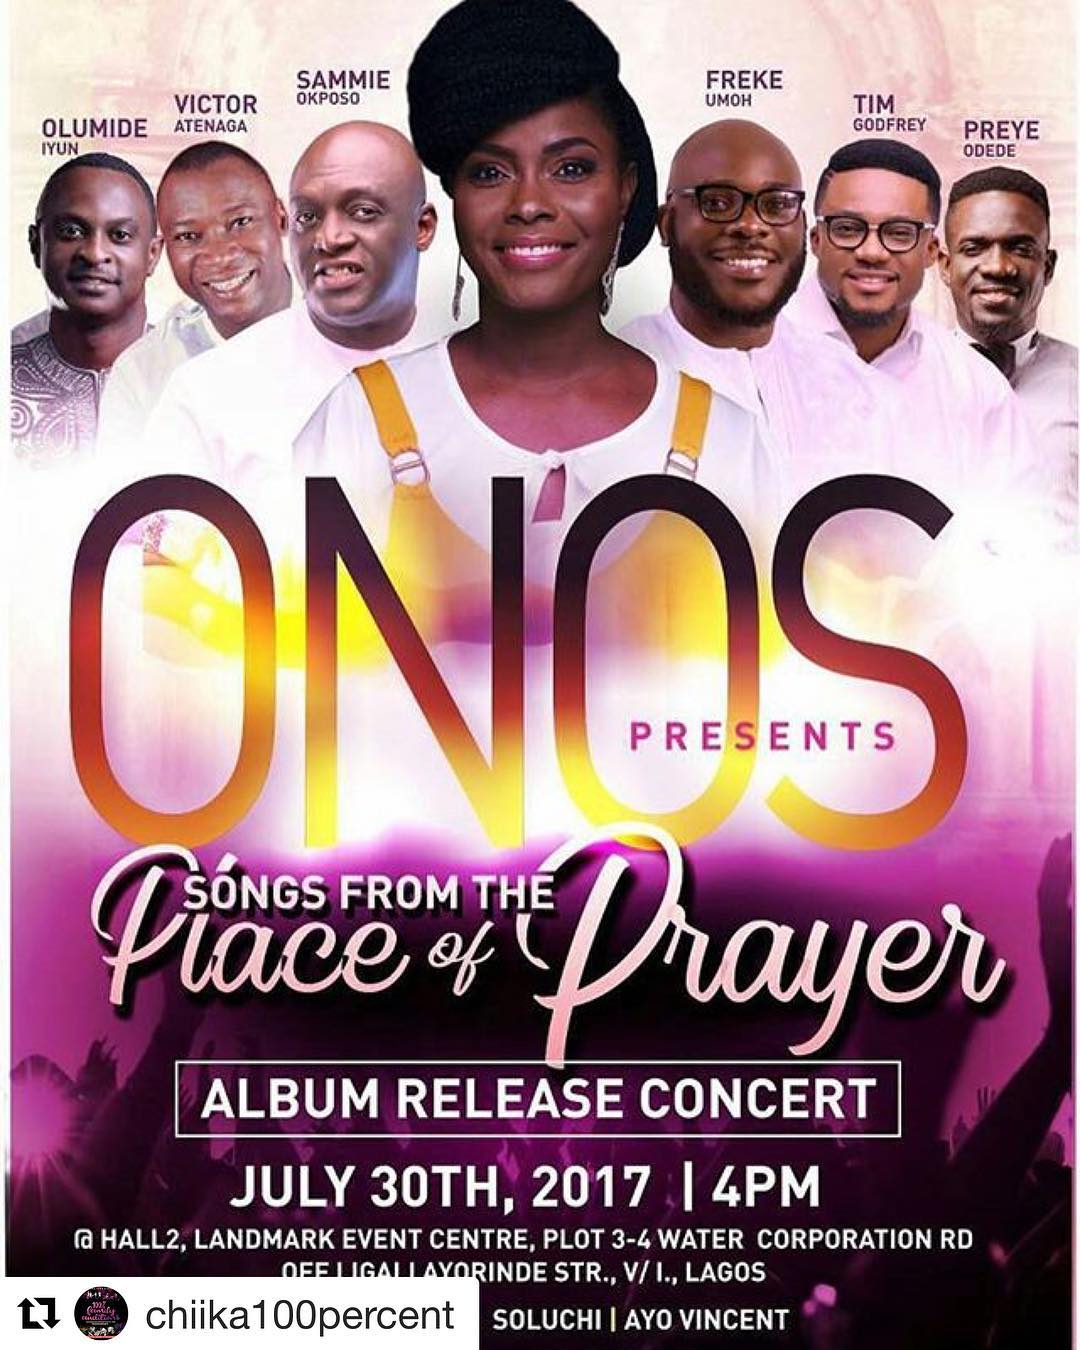 SONGS FROM THE PLACE OF PRAYER